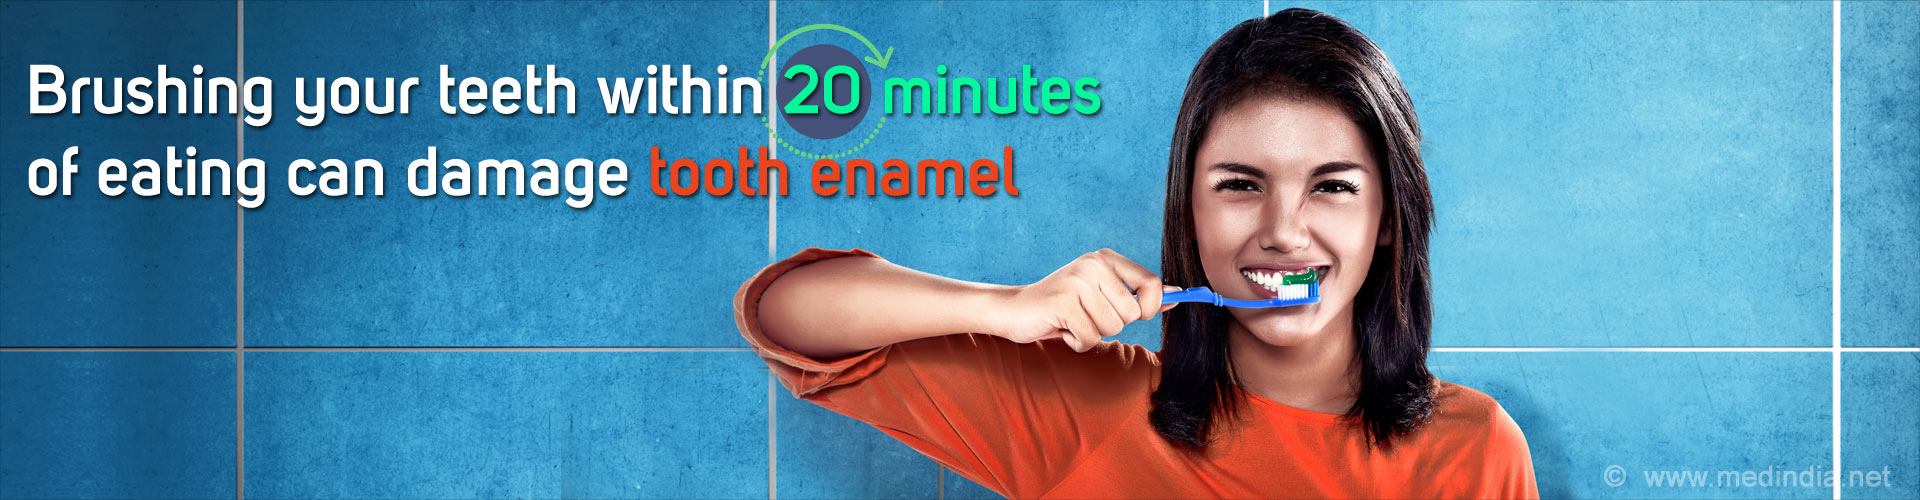 Brush your teeth 30 minutes after a meal to avoid damage to tooth enamel